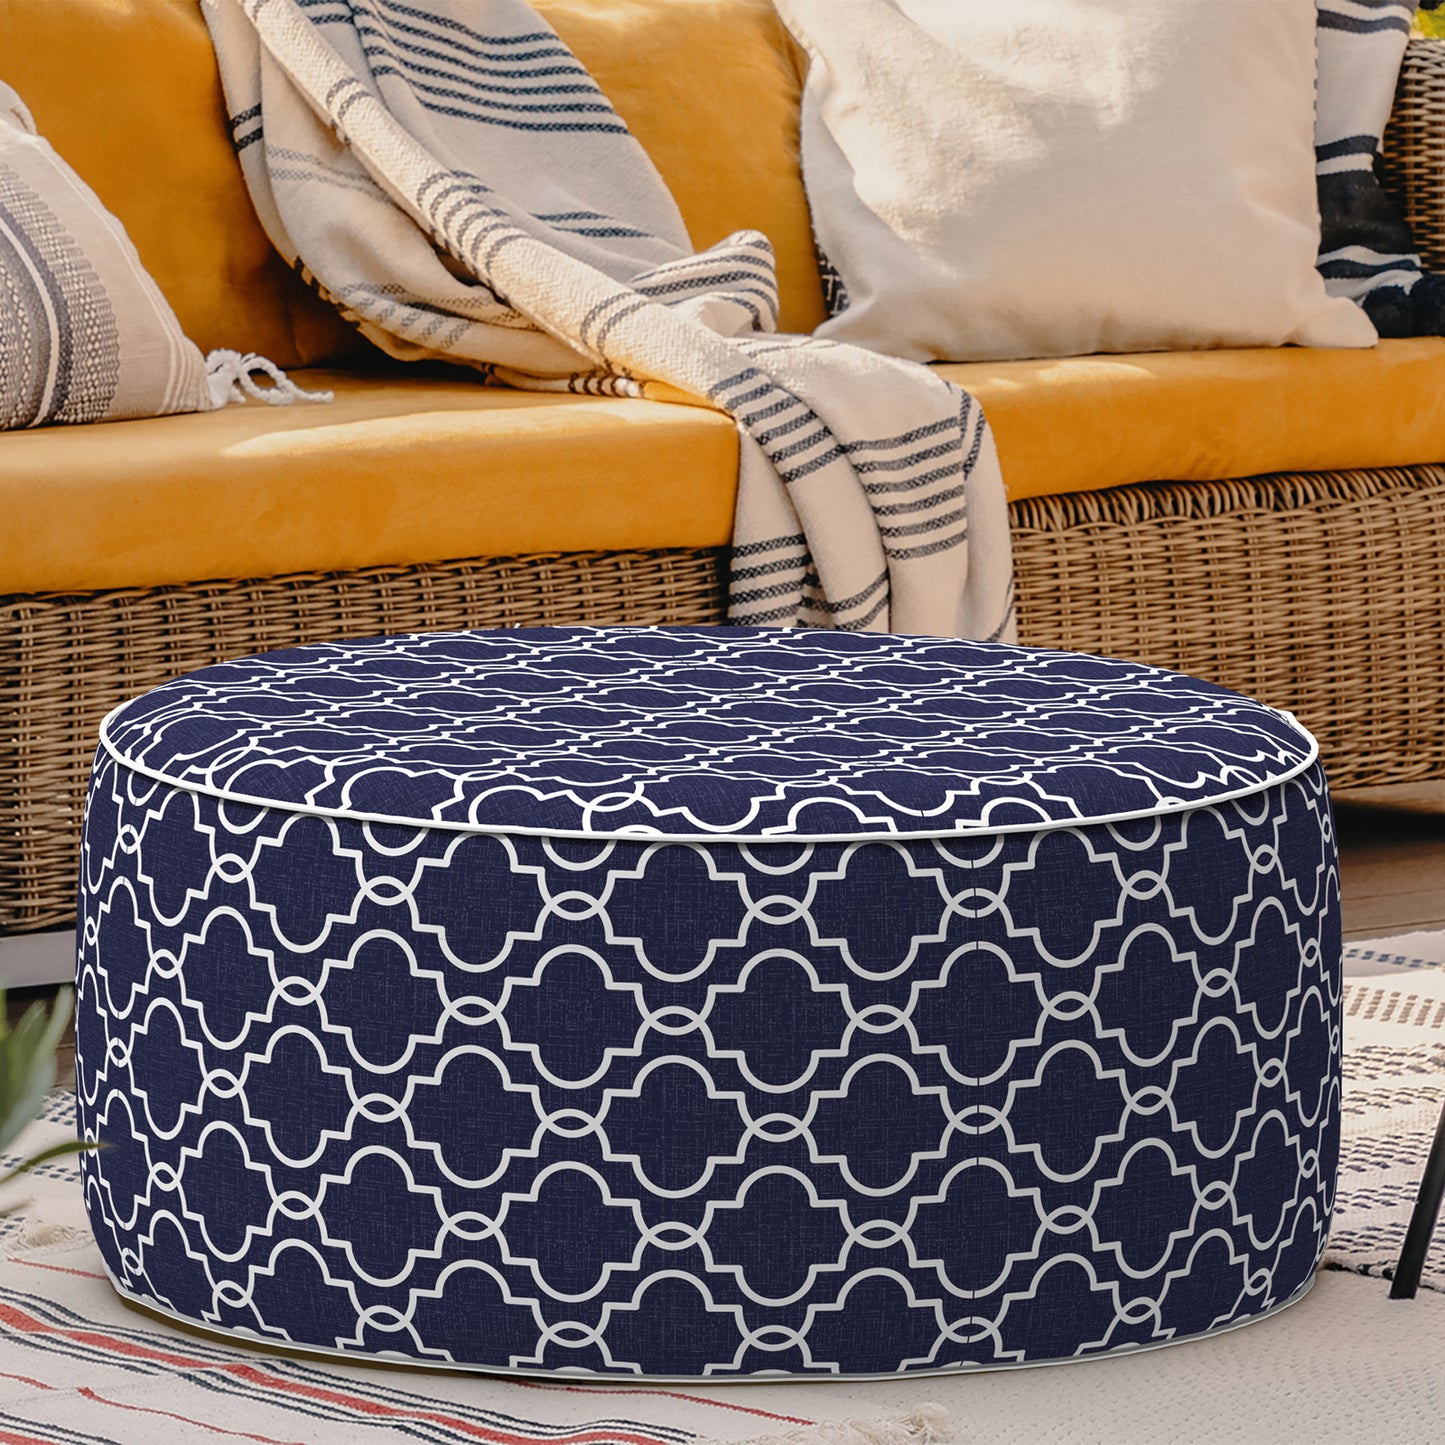 Outdoor Inflatable Stool Ottoman, All Weather Portable Footrest Stool, Furniture Stool Ottomans for Home Garden Beach, D31”xH14”, Carmody Navy